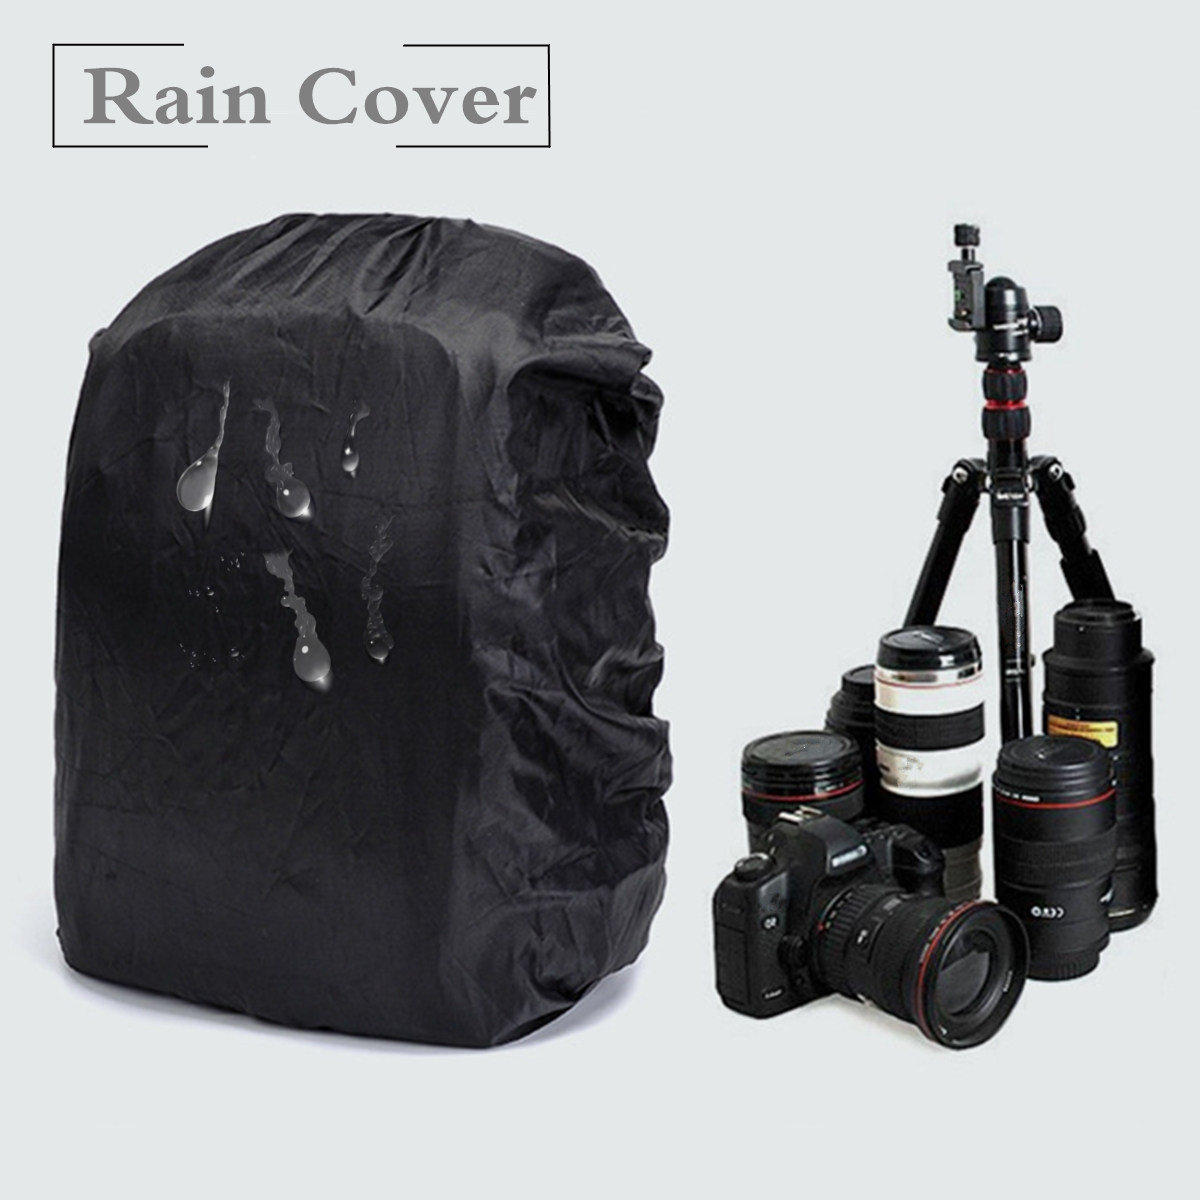 Waterproof Camera Backpack Travel DSLR Bag W/ Rain Cover For Canon Sony 19